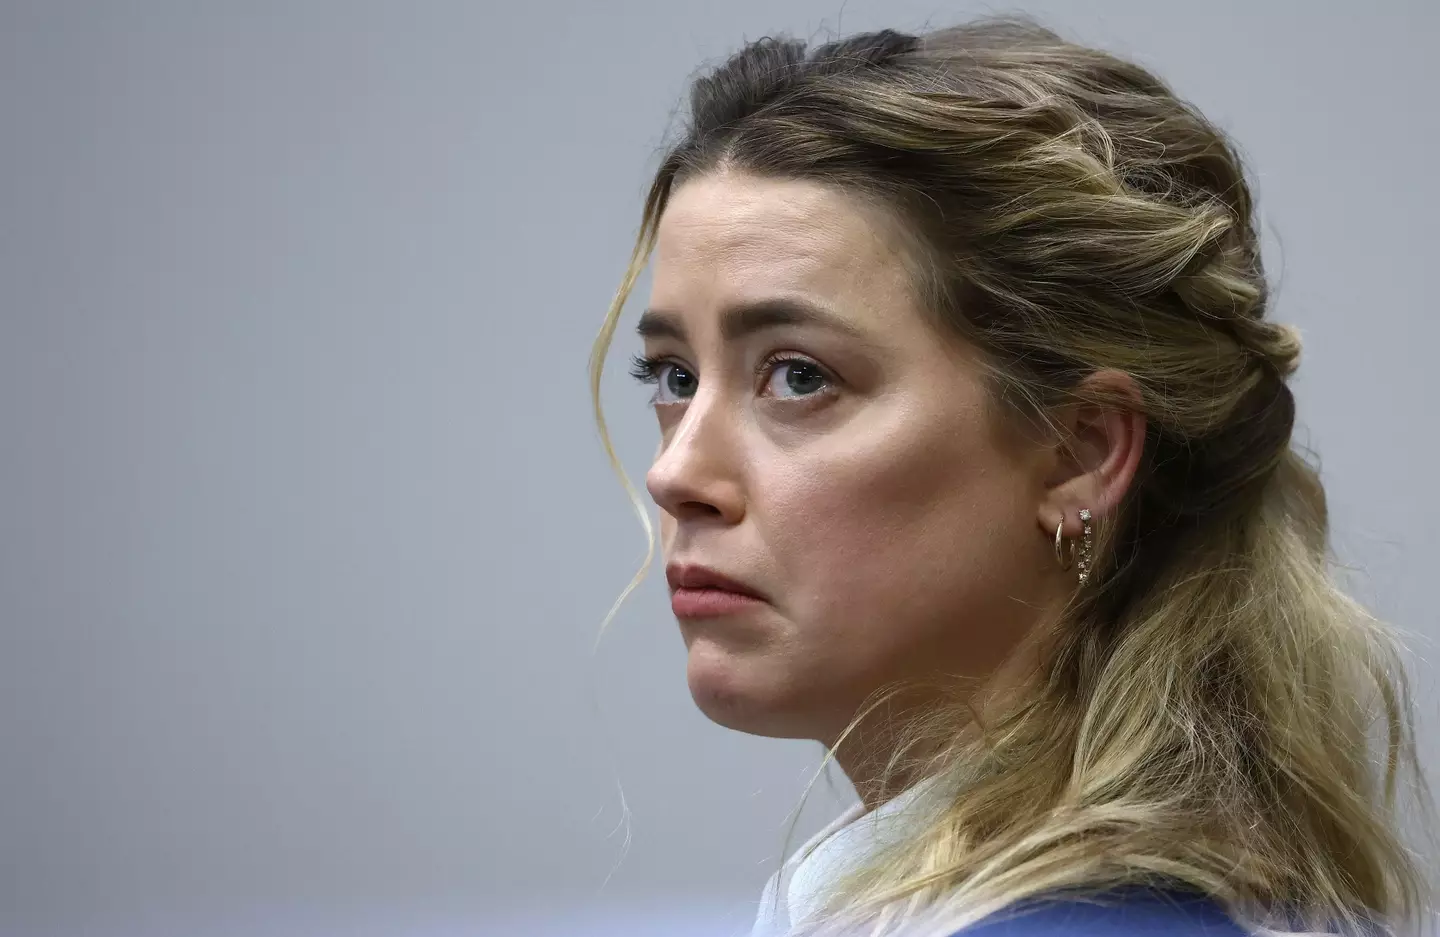 Amber Heard at her trial against ex-husband Johnny Depp.